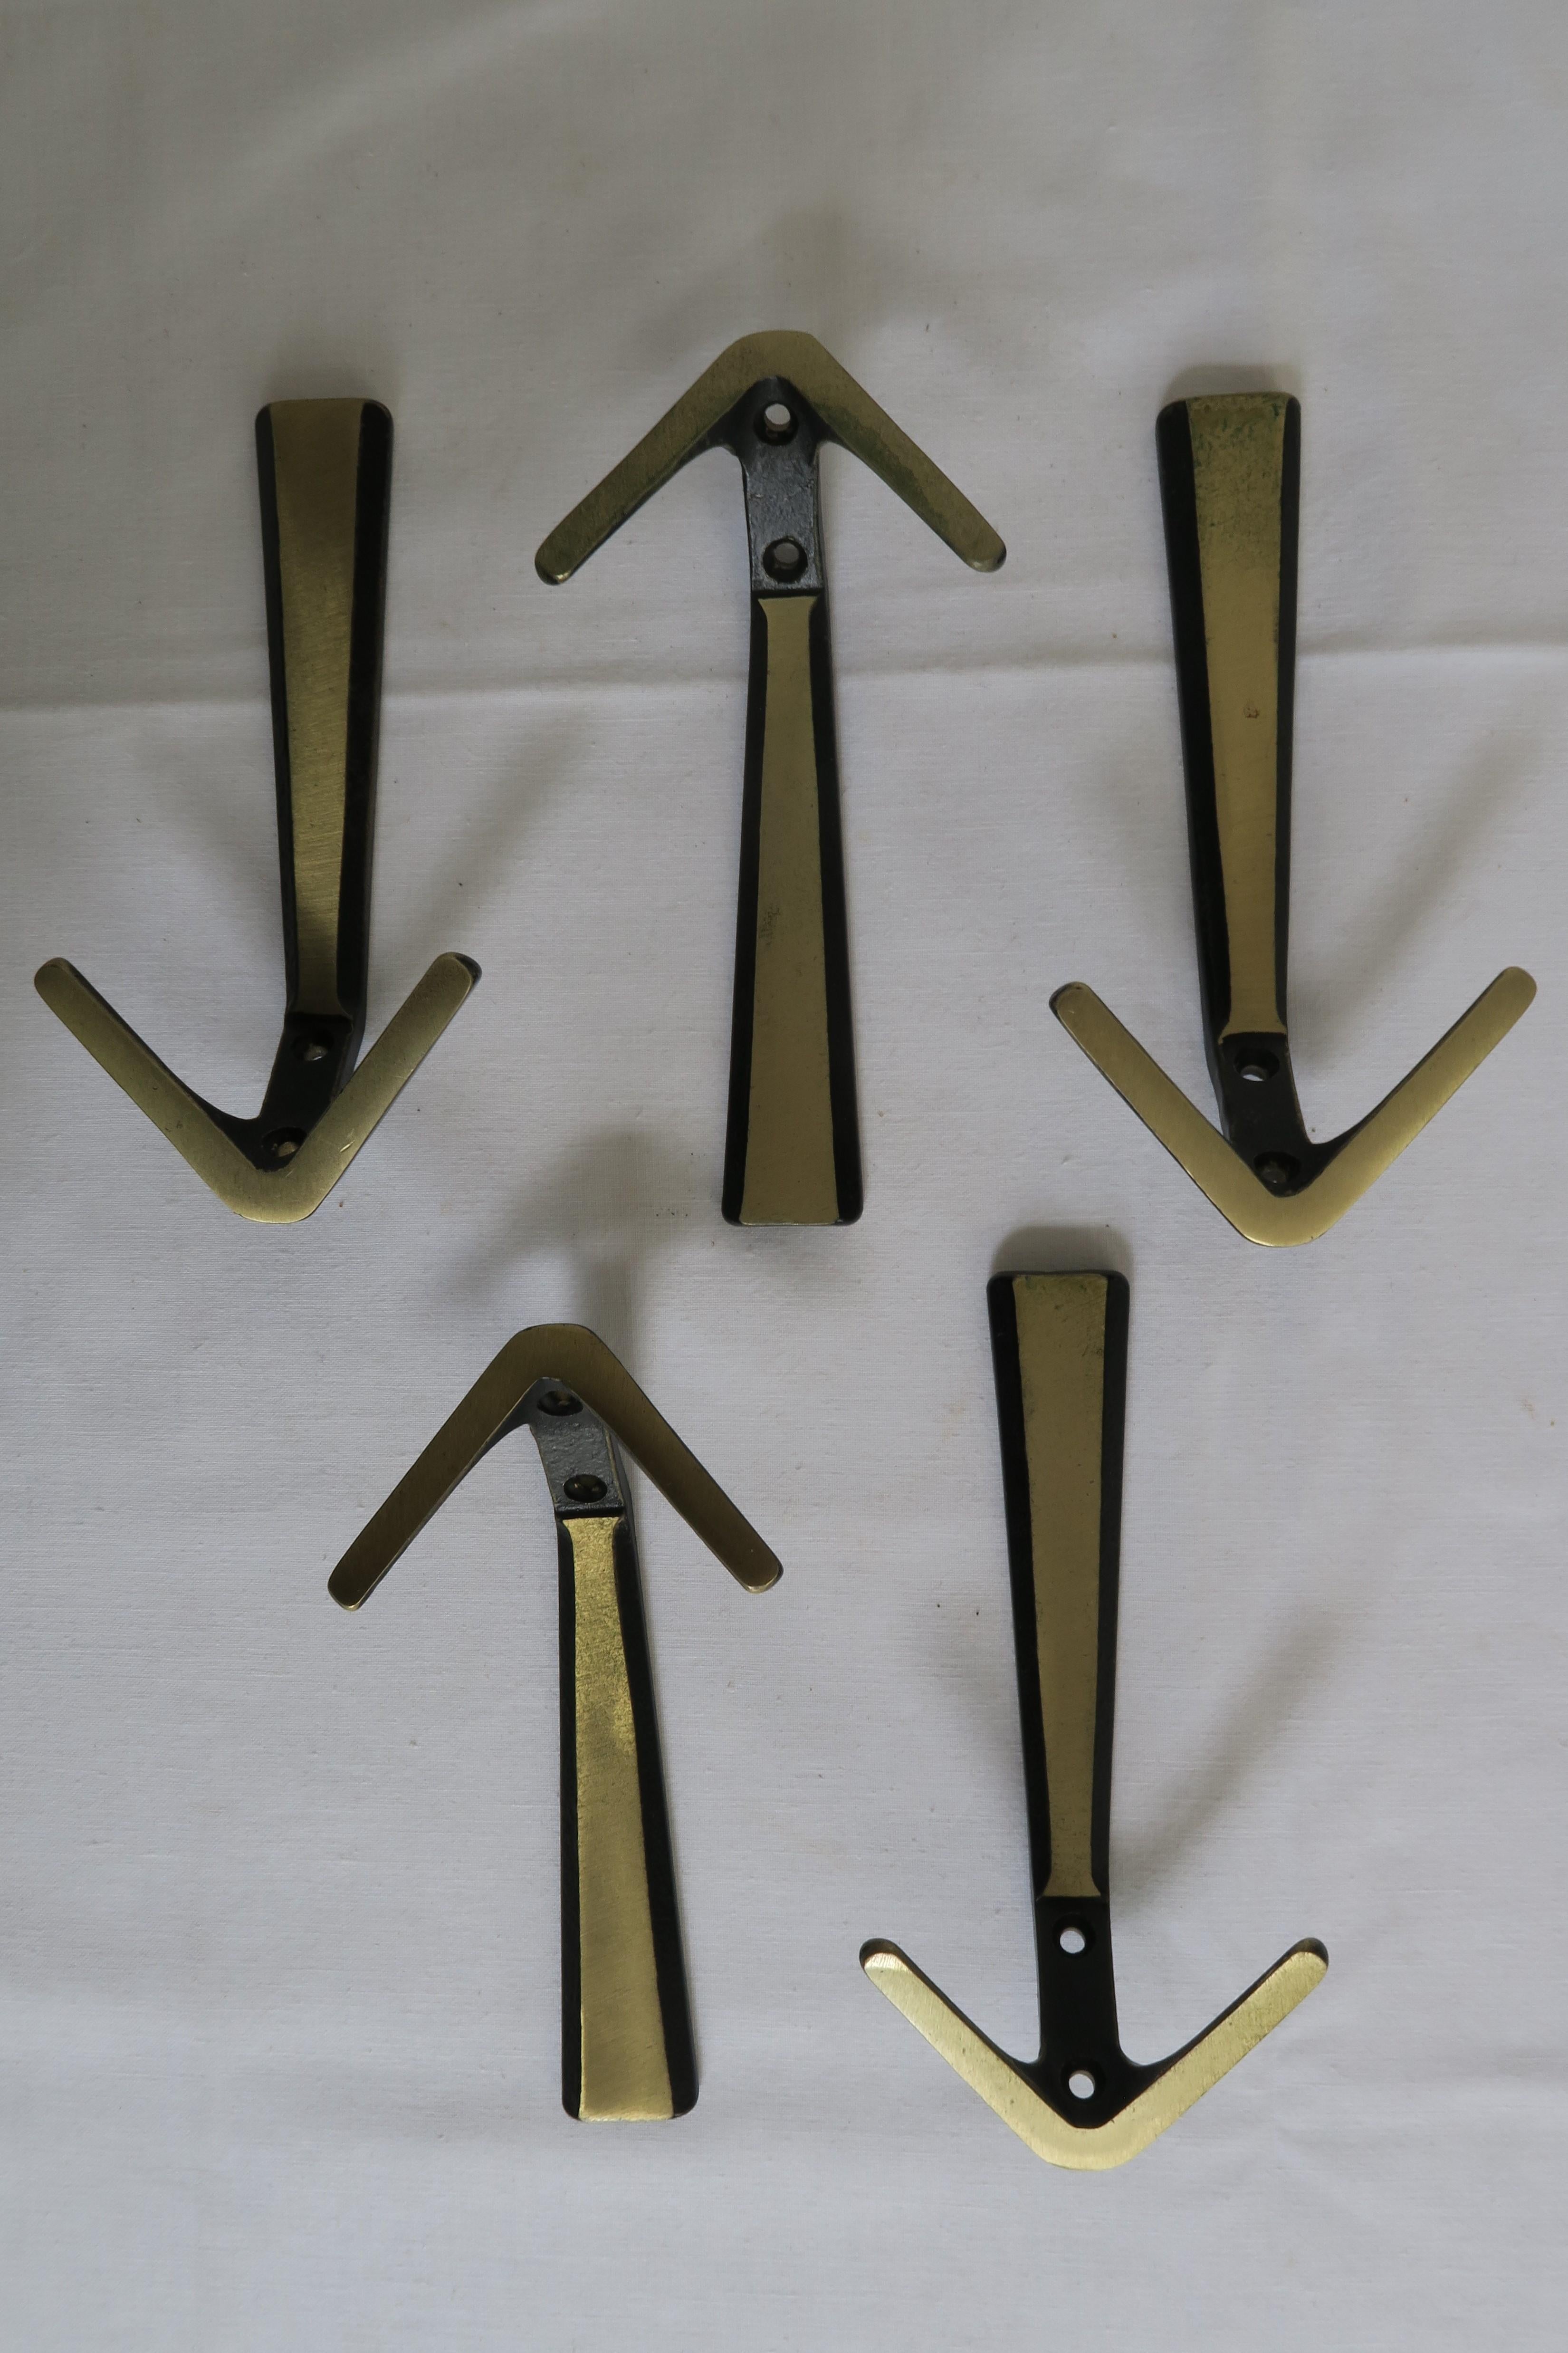 For sale are five beautiful Mid-Century Modern coat hooks. They have been made in the style of the renowned Austrian Werkstätte Hagenauer. The hooks were made From Vienna bronze and have a warm age appropriate patina.

The objects are in excellent